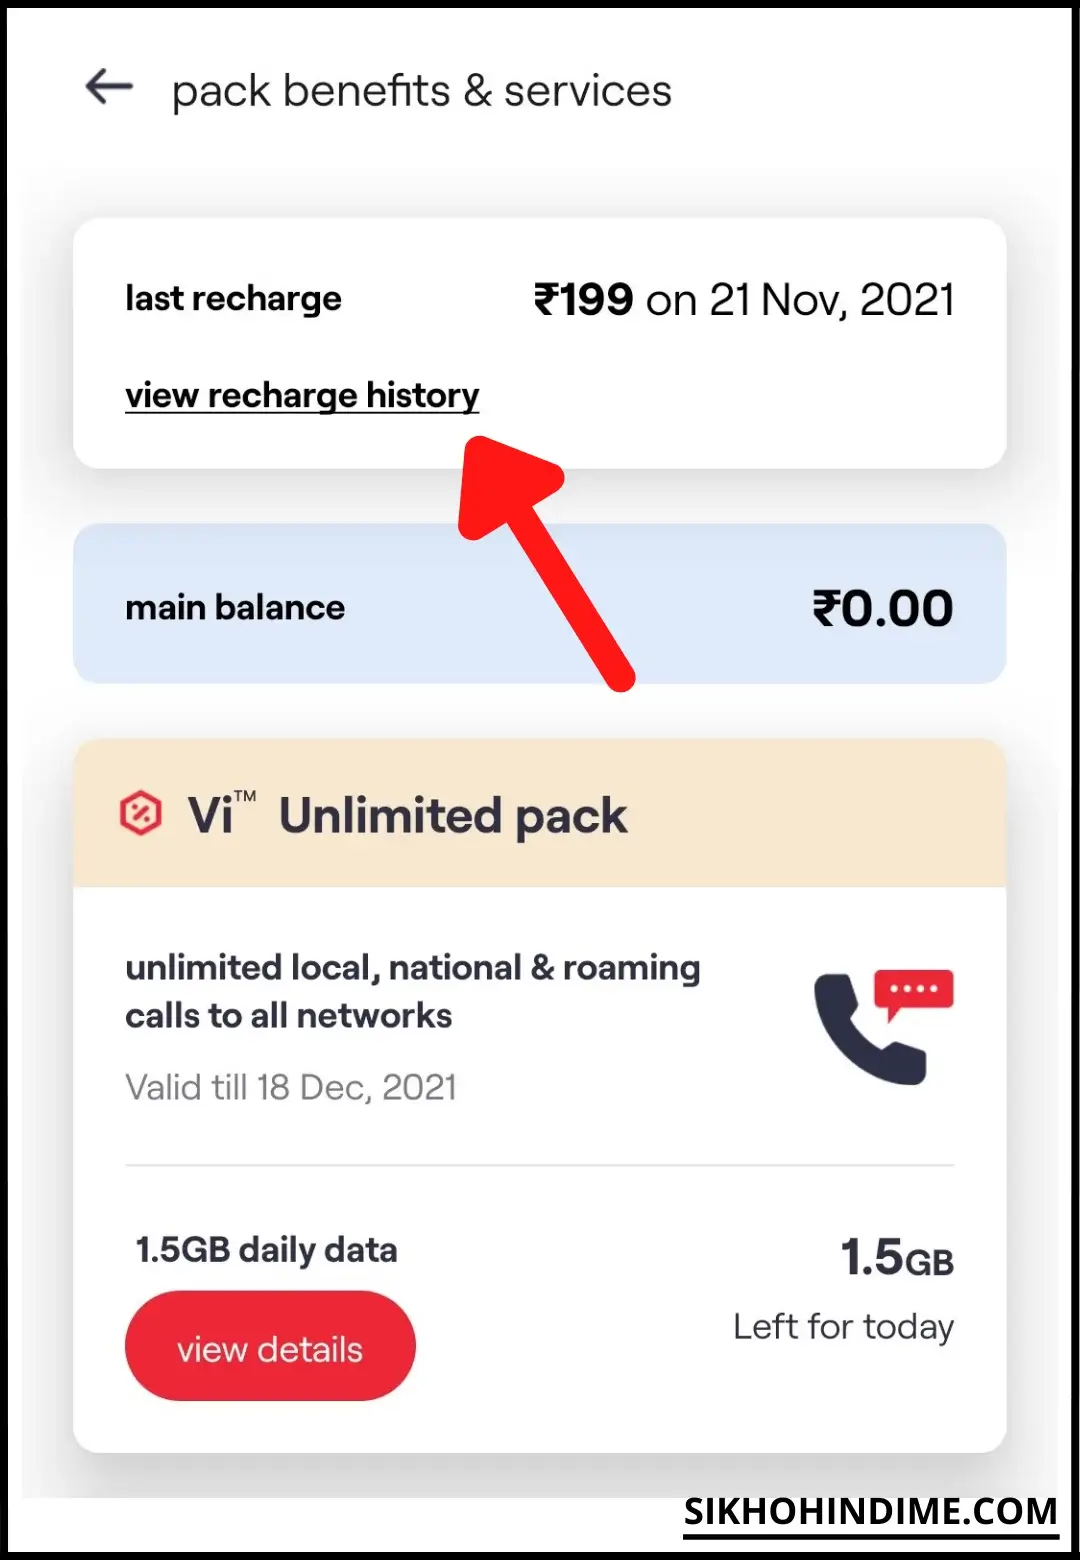 Click on view recharge history